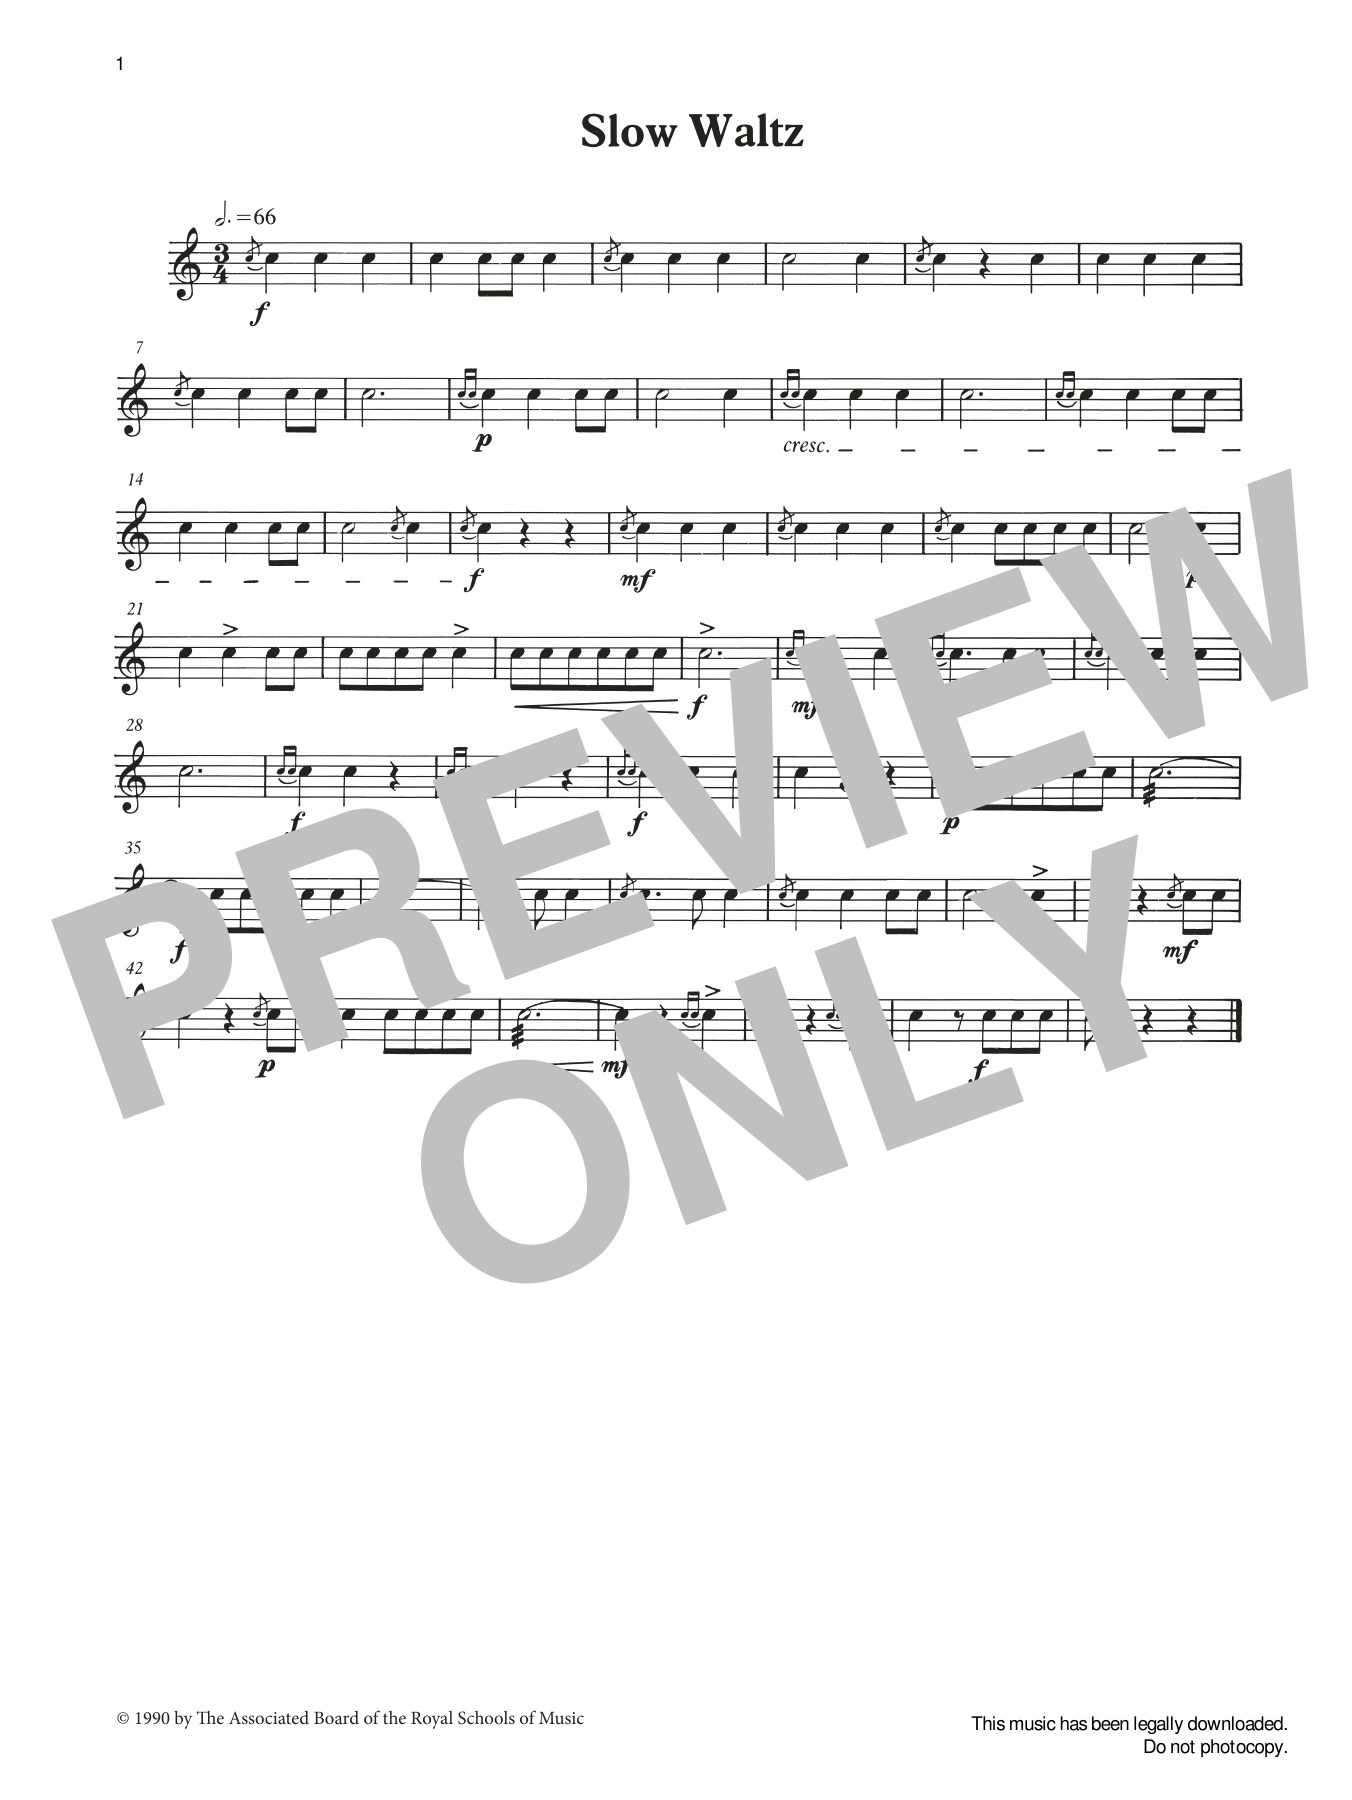 Download Ian Wright and Kevin Hathaway Slow Waltz from Graded Music for Snare Sheet Music